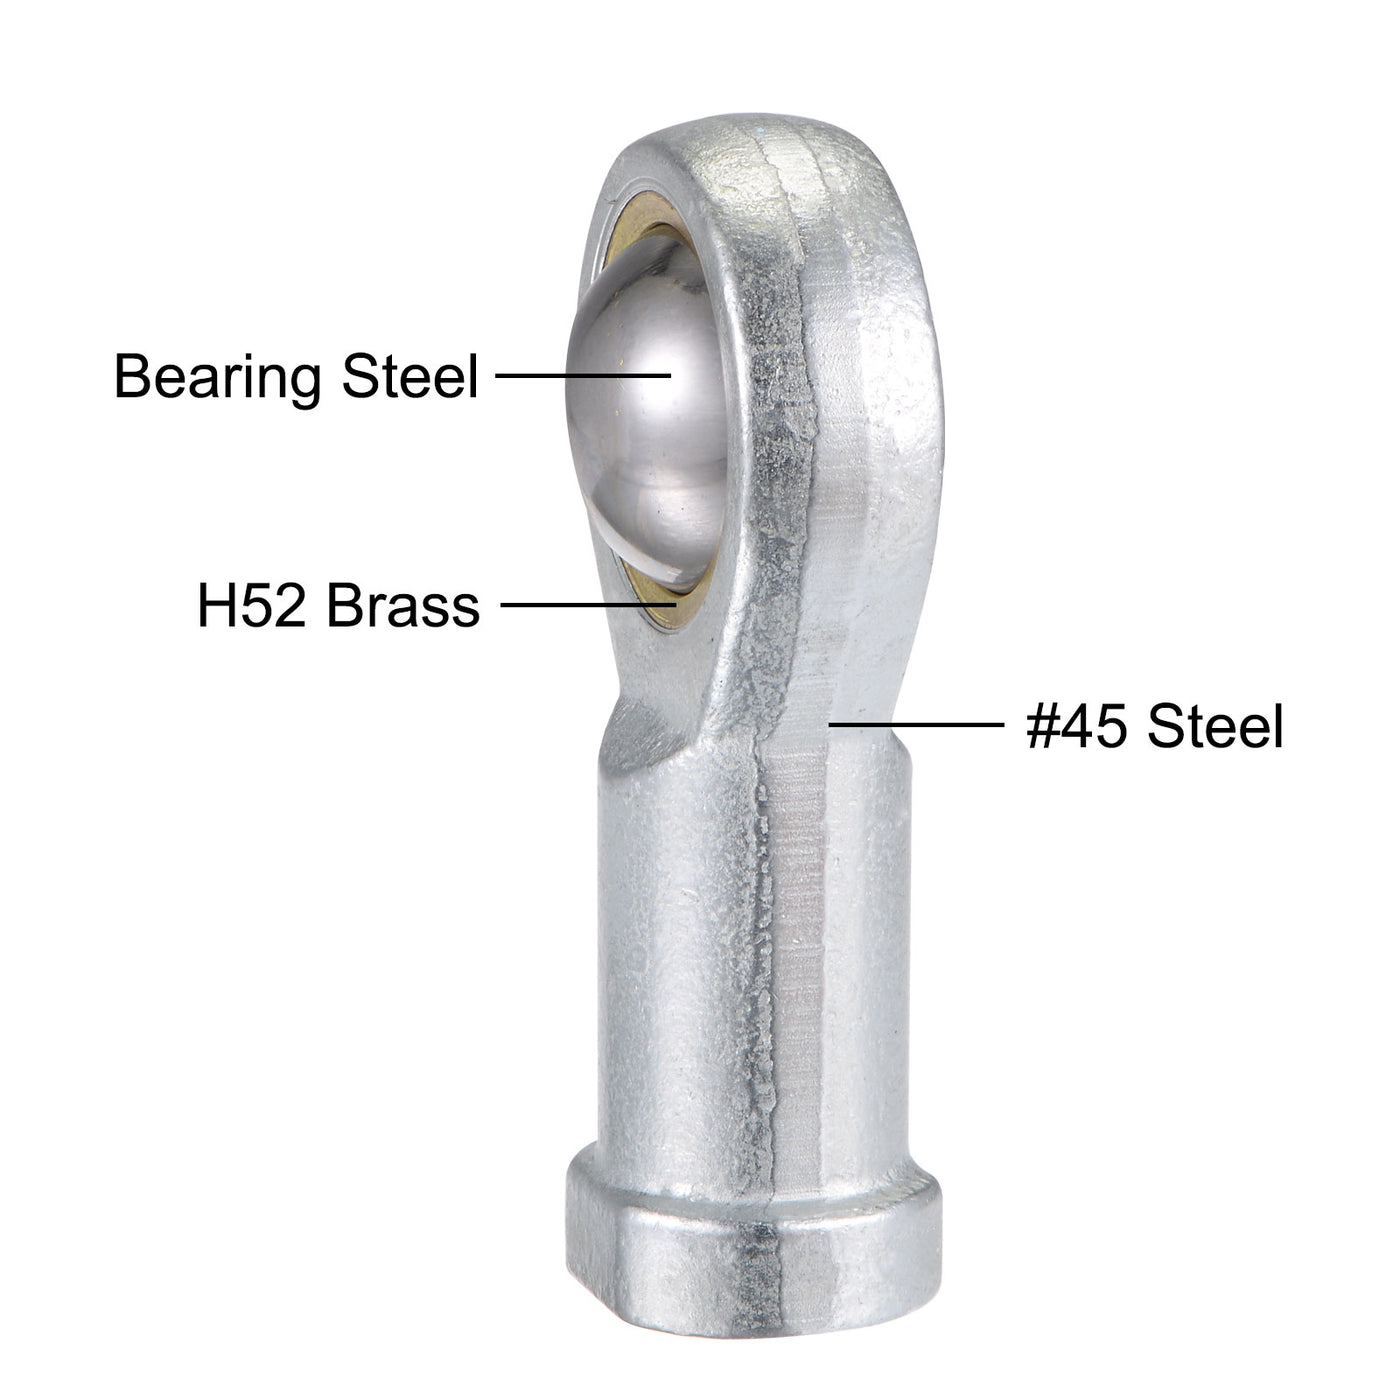 uxcell Uxcell SI20TK PHSA20 Rod End Bearing 20mm Bore M20x1.5 Right Hand Female Thread